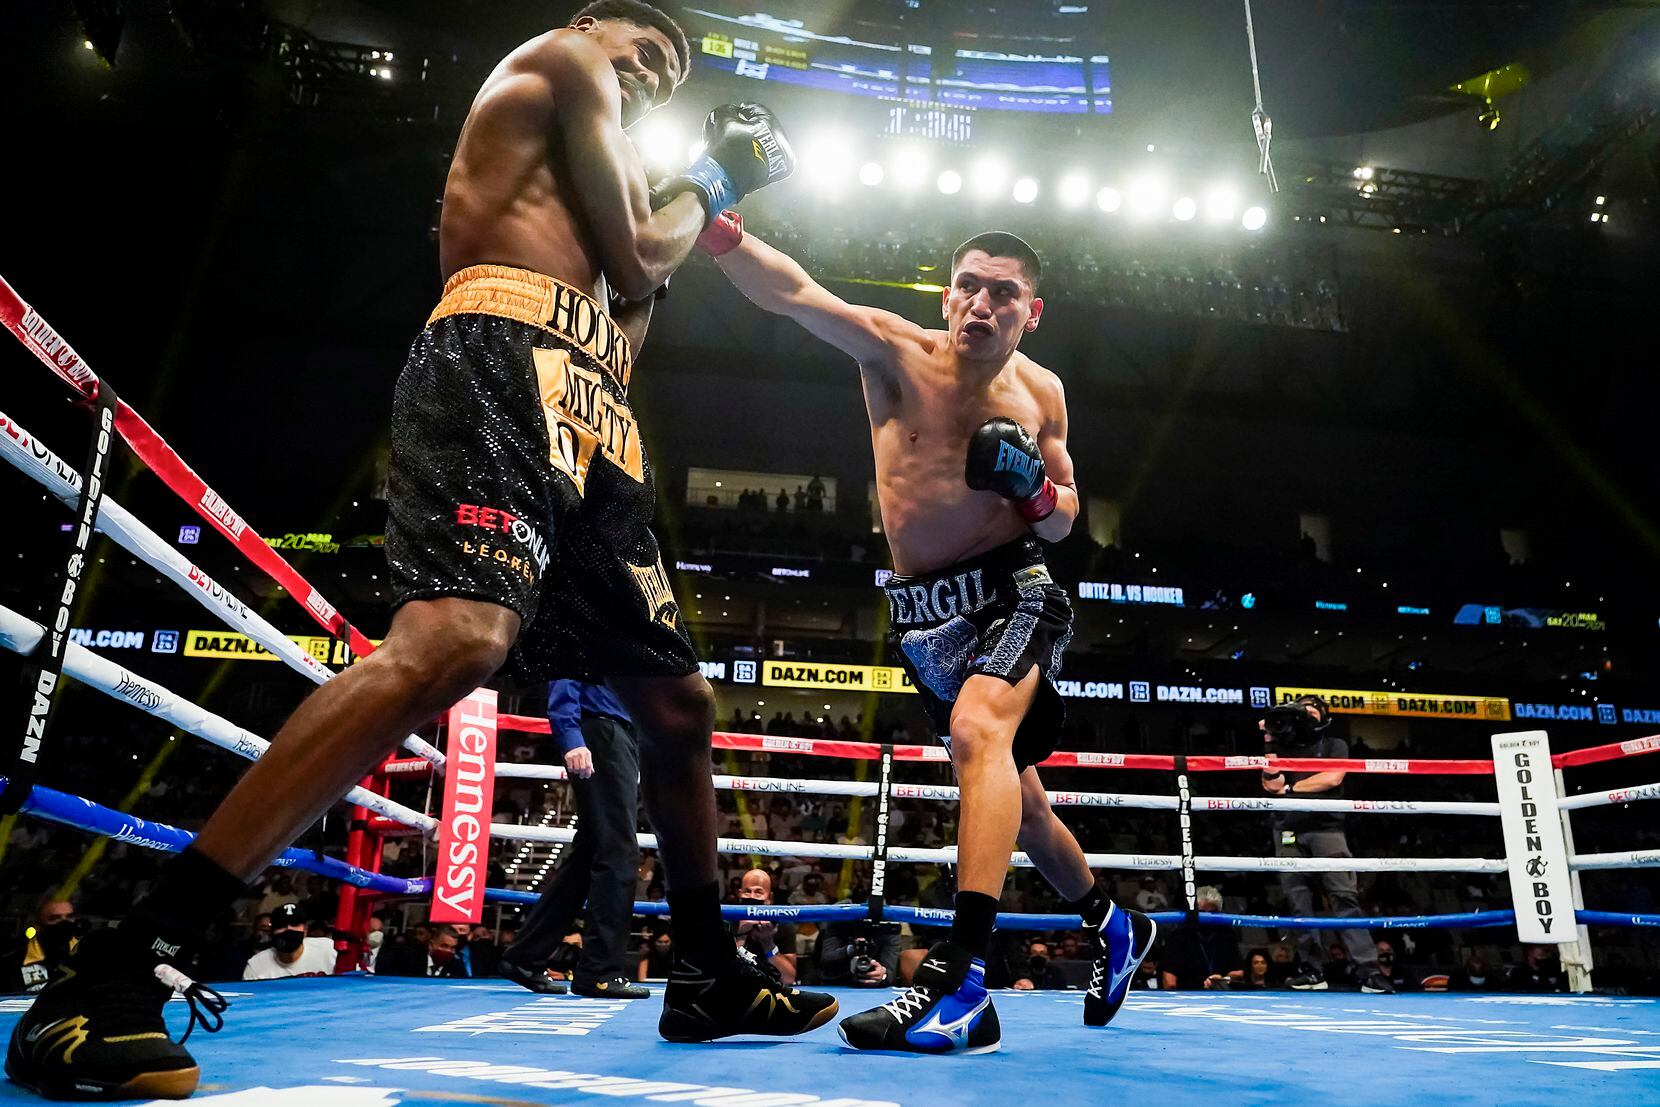 Vergil Ortiz Jr. (left) lands a punch on Maurice Hooker as they fight for the vacant WBO international welterweight title at Dickies Arena on Saturday, March 20, 2021, in Fort Worth.